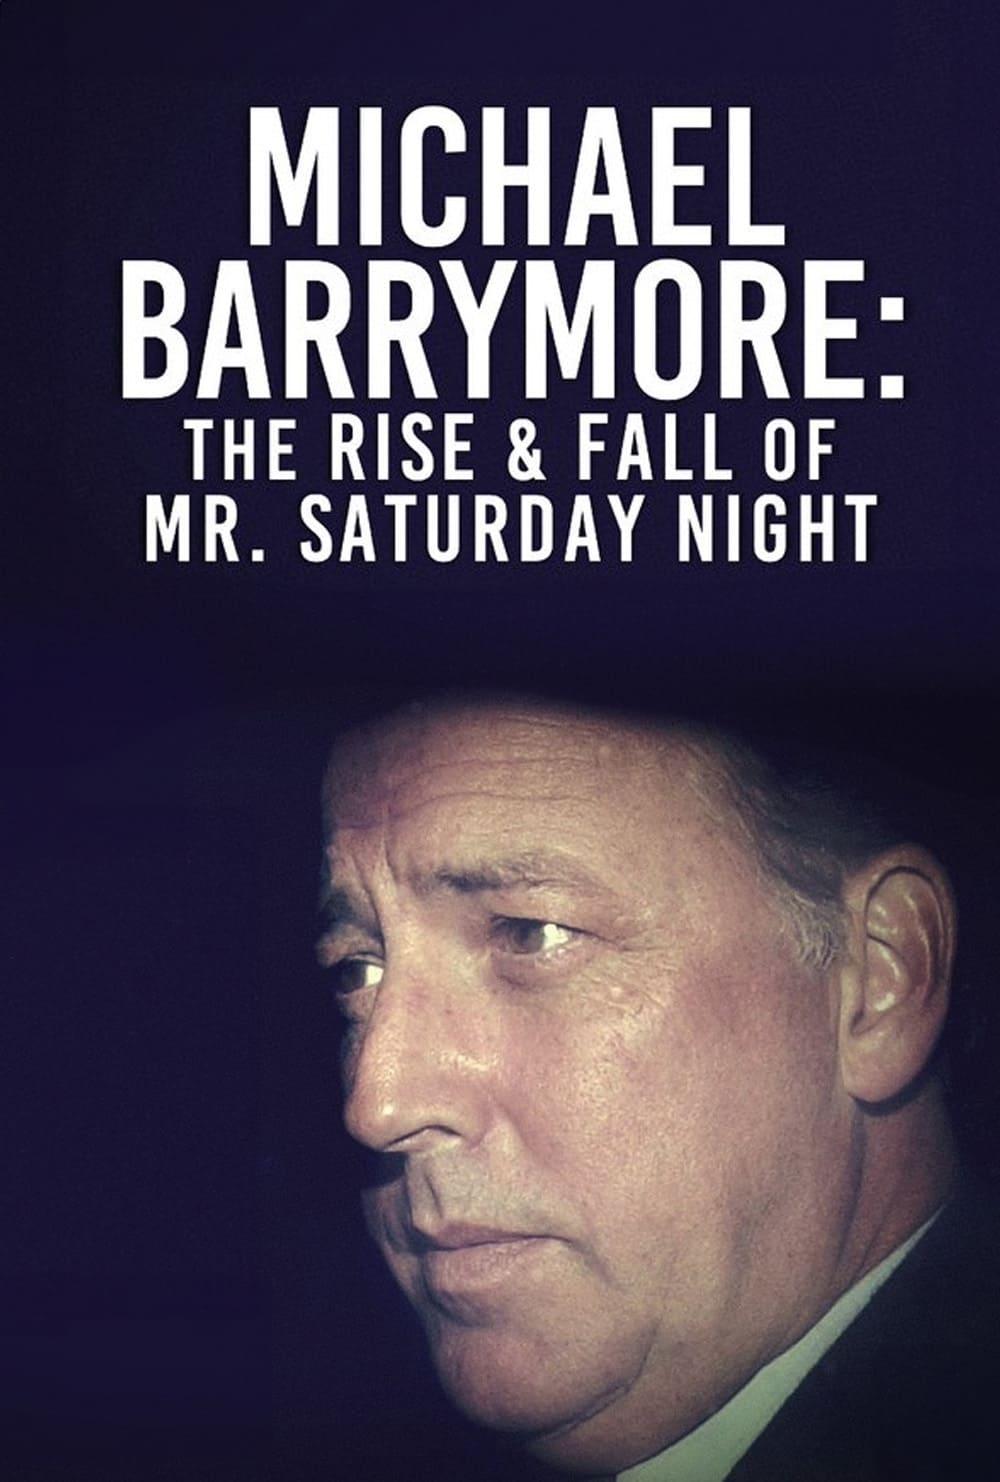 Michael Barrymore: The Rise And Fall Of Mr Saturday Night poster